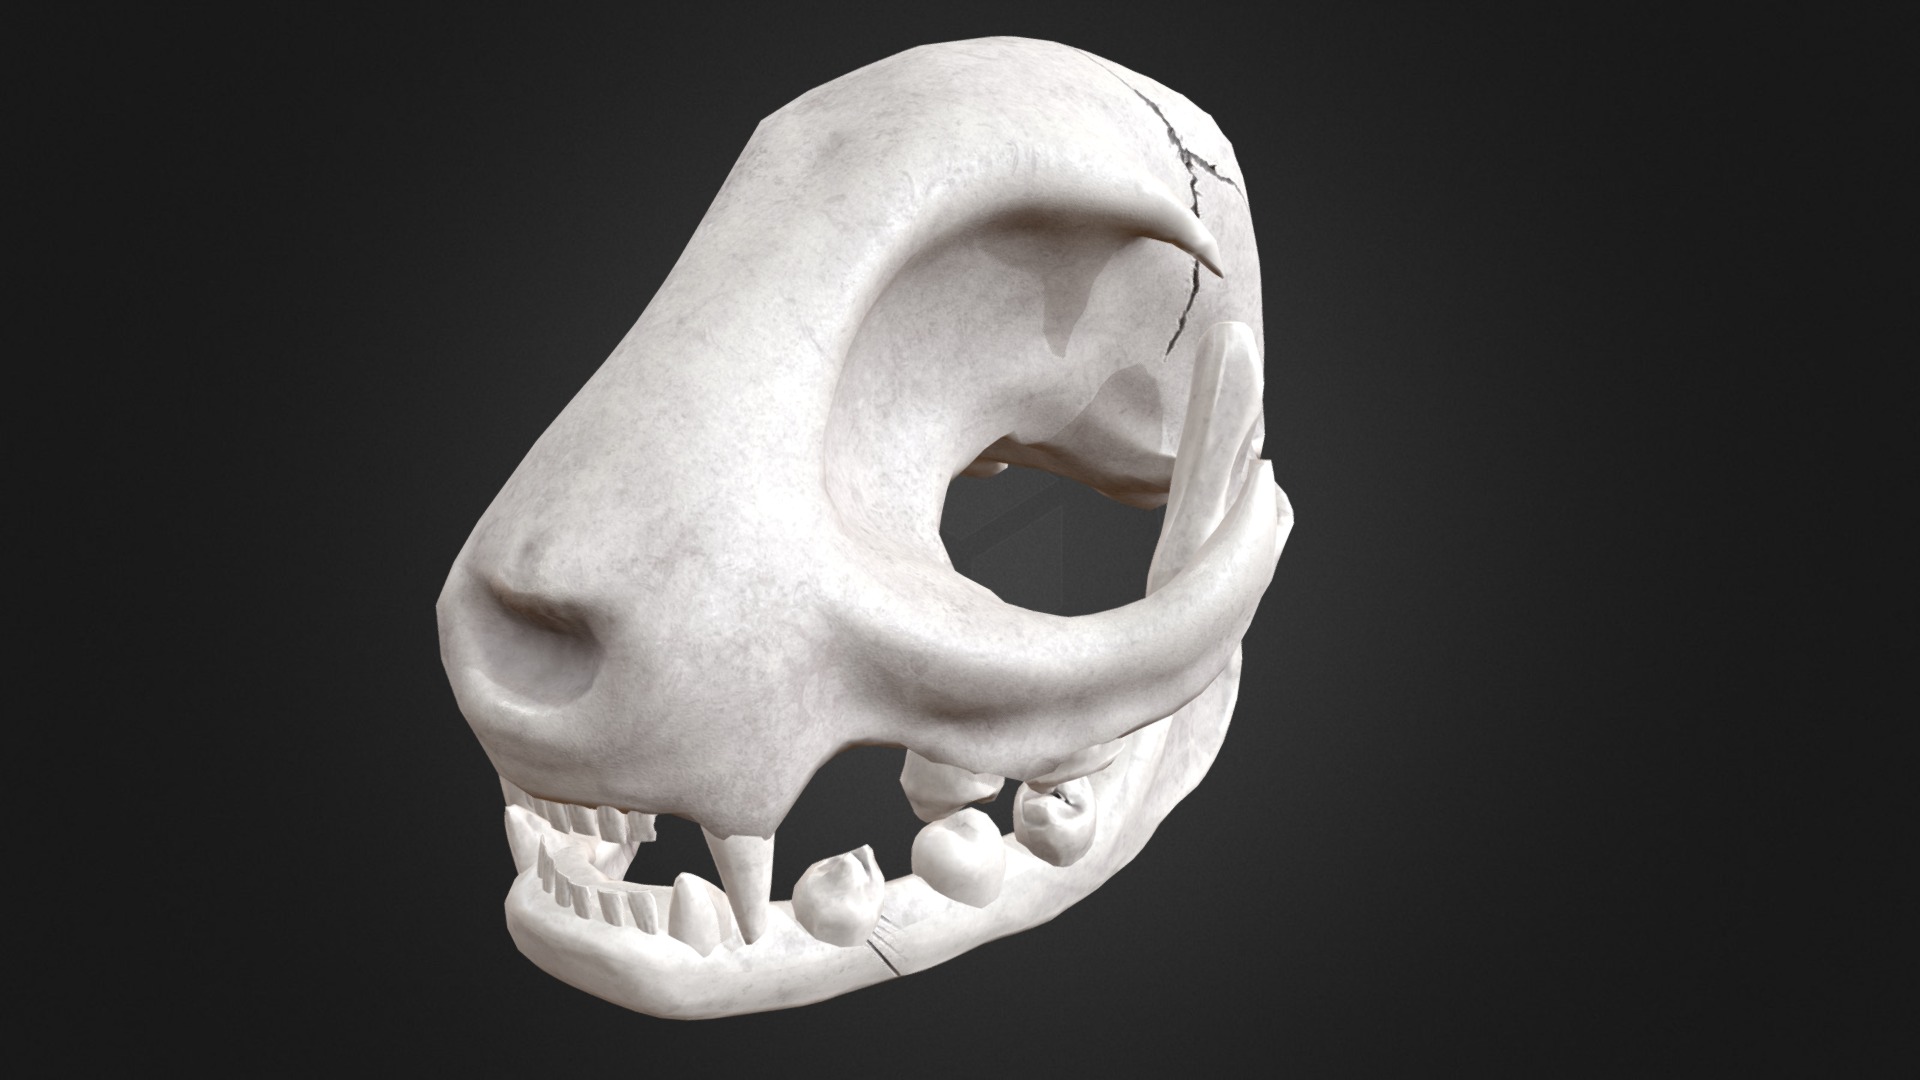 3D model Cat Skull - This is a 3D model of the Cat Skull. The 3D model is about a human skull with a human mouth.